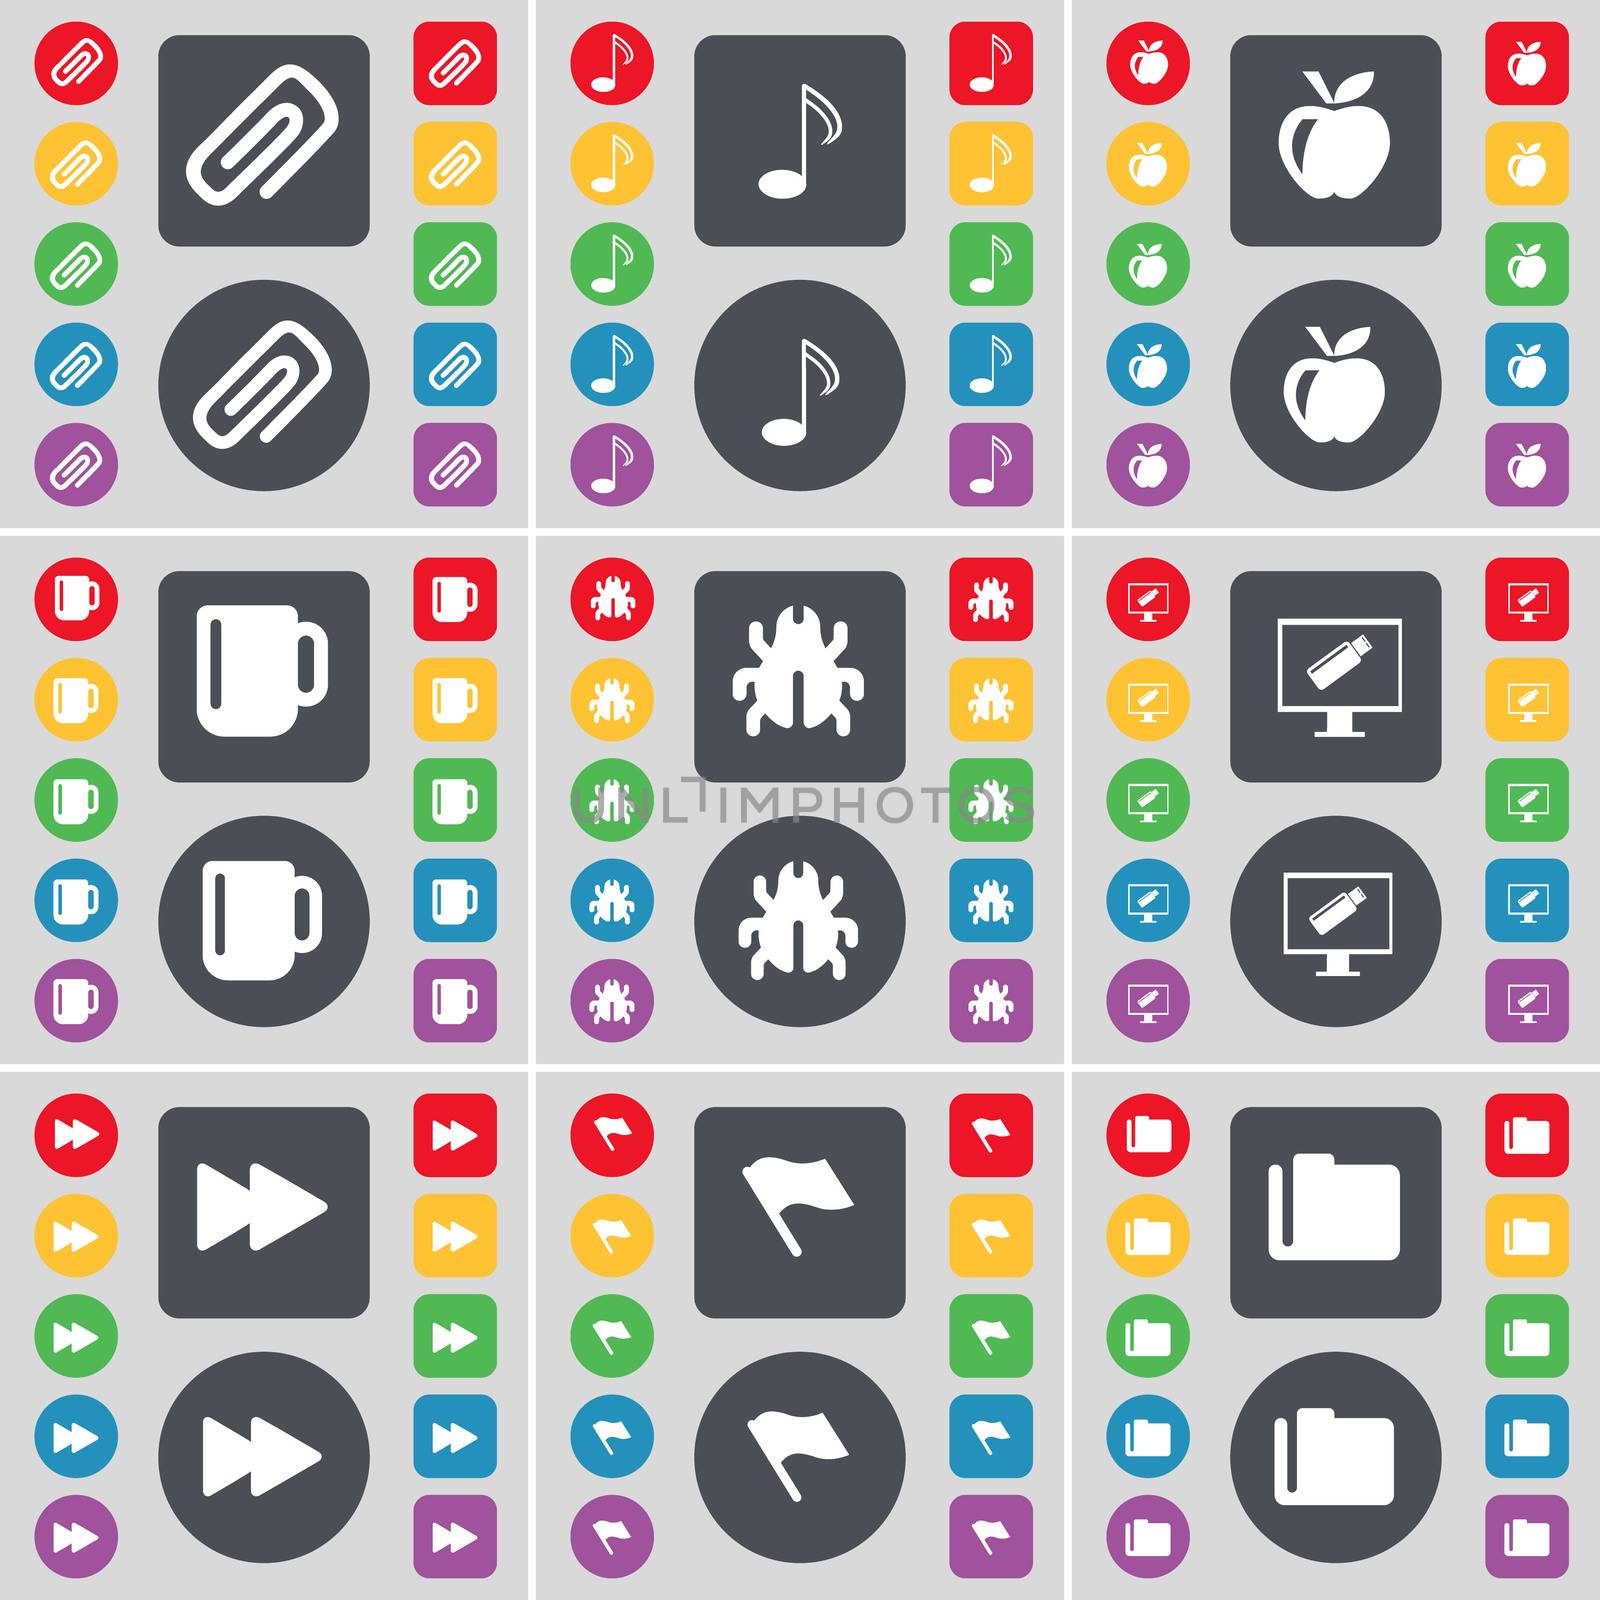 Clip, Note, Apple, Cup, Bug, Montor, Rewind, Flag, Folder icon symbol. A large set of flat, colored buttons for your design. illustration